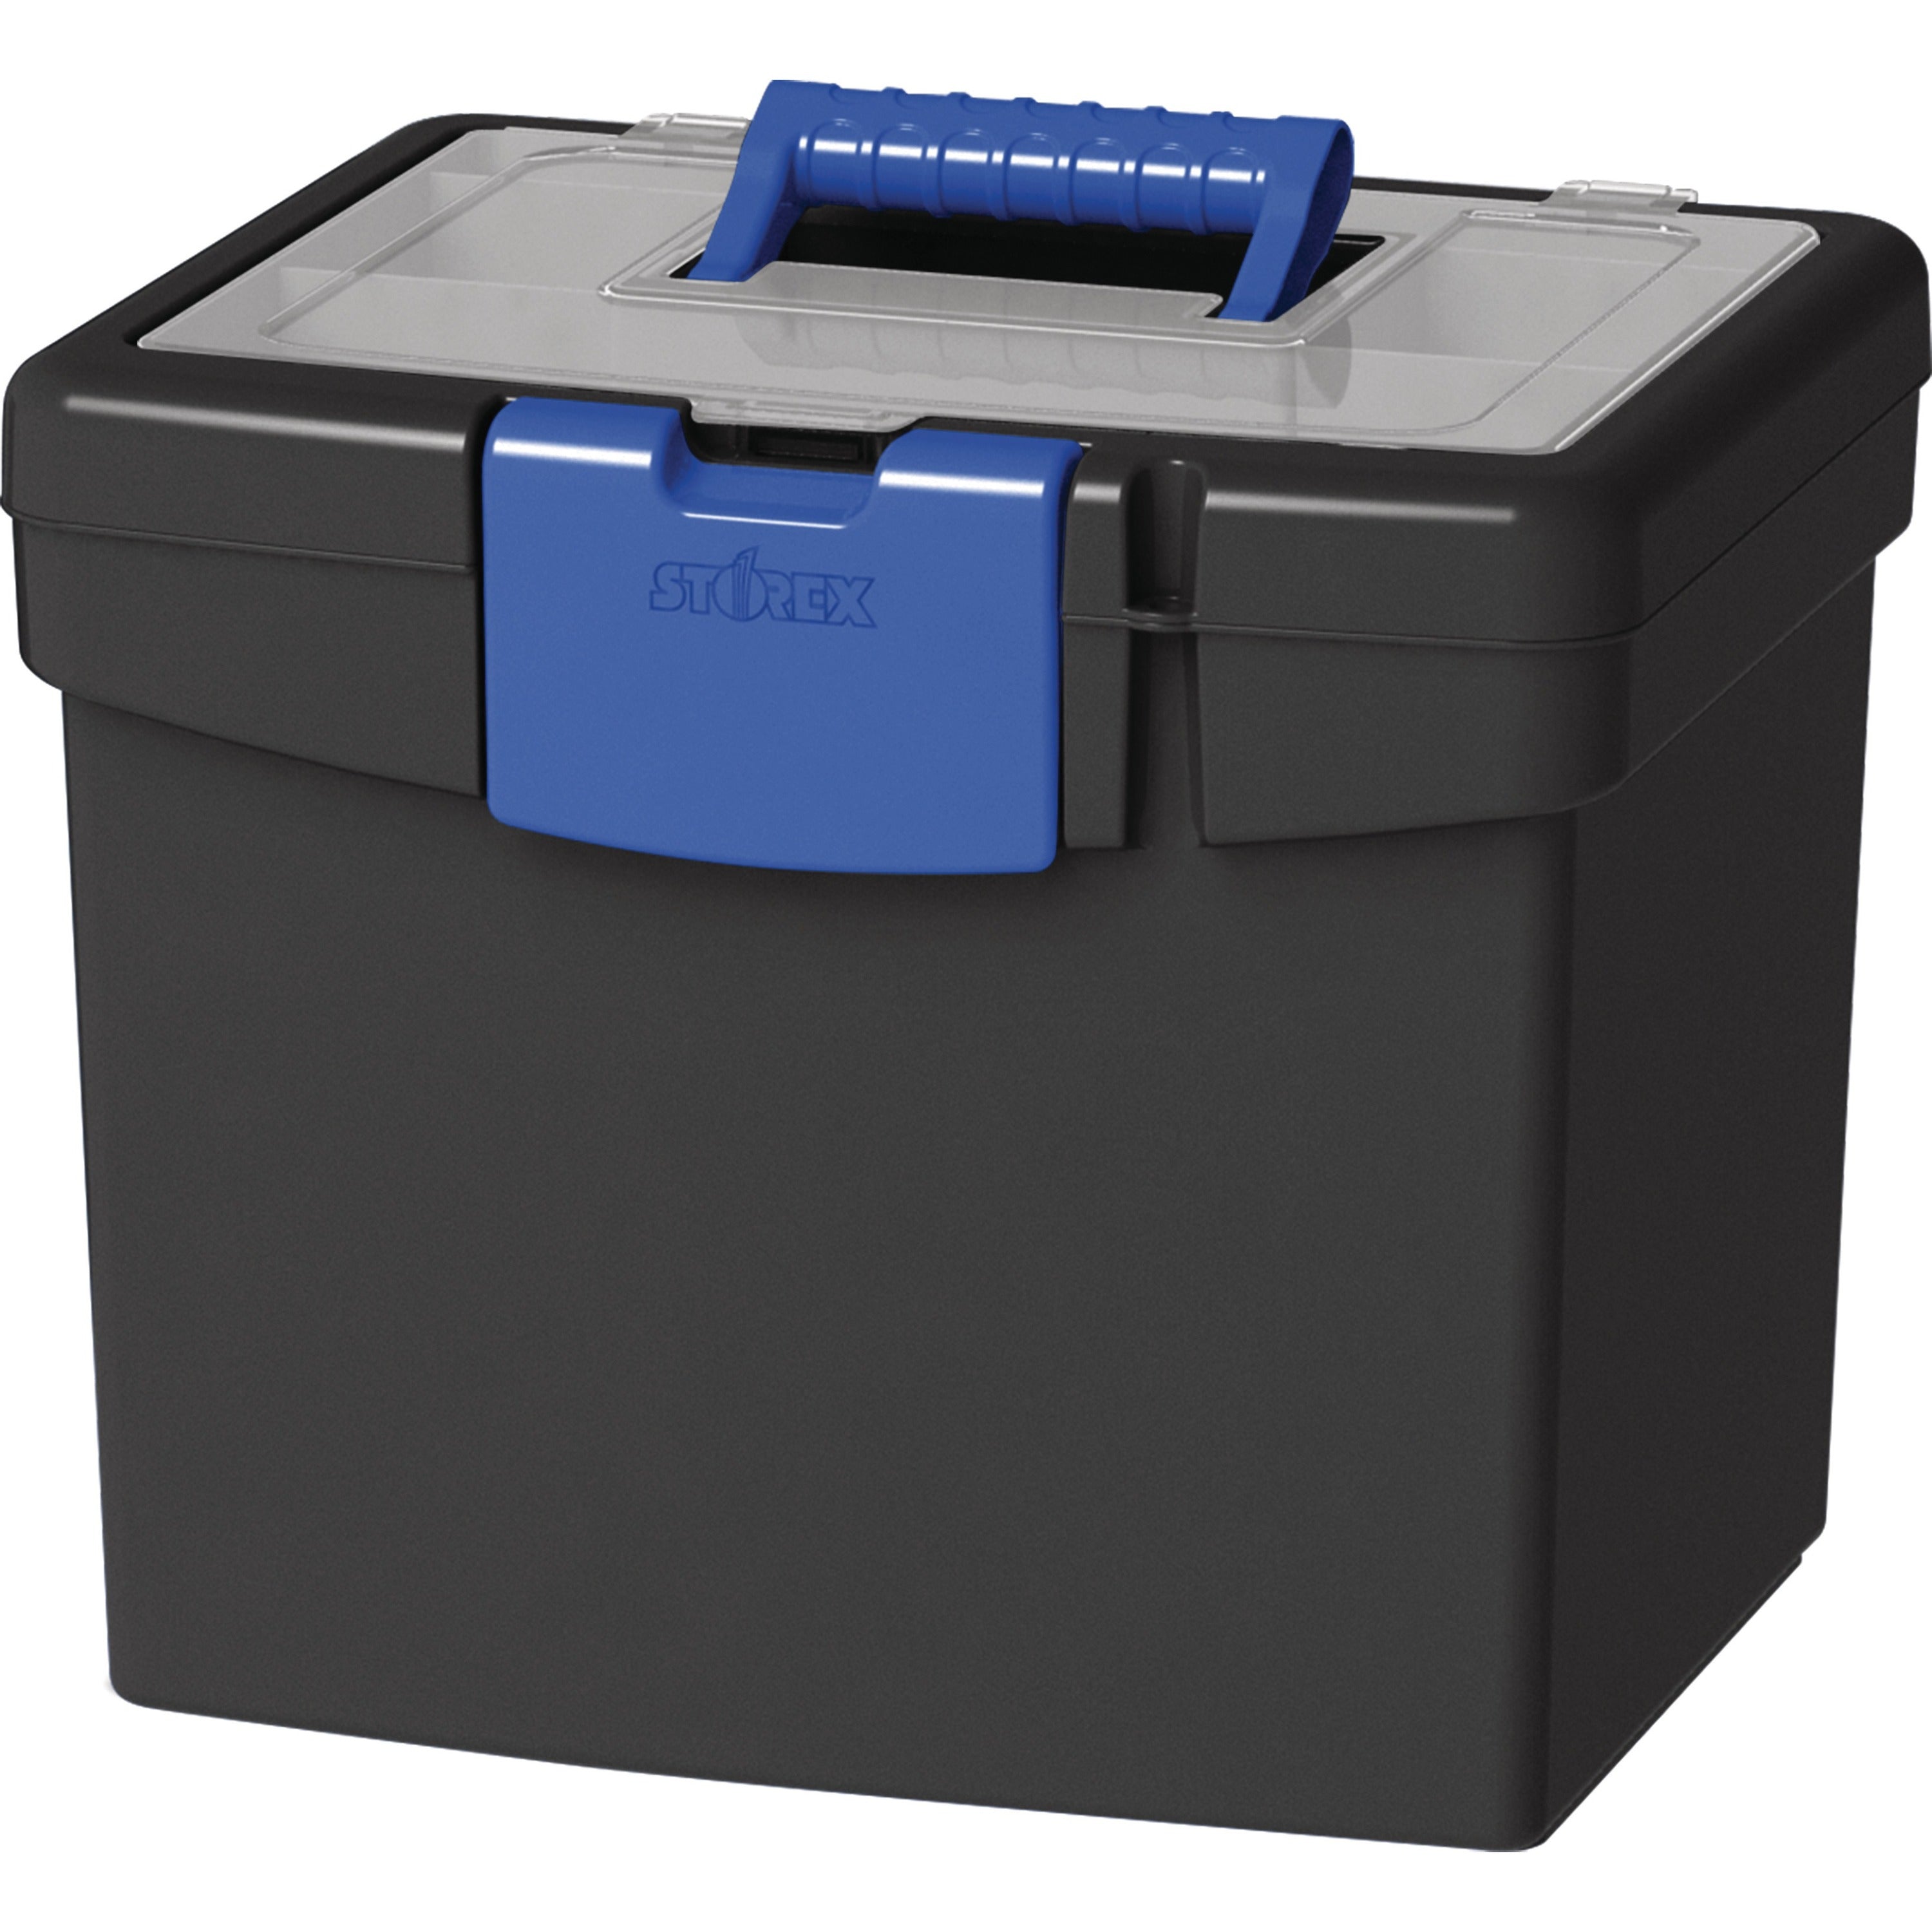 storex-file-storage-box-with-xl-storage-lid-external-dimensions-109-length-x-133-width-x-11-height-30-lb-media-size-supported-letter-850-x-11-clamping-latch-closure-plastic-black-blue-for-file-folder-1-each_stx61415b02c - 1